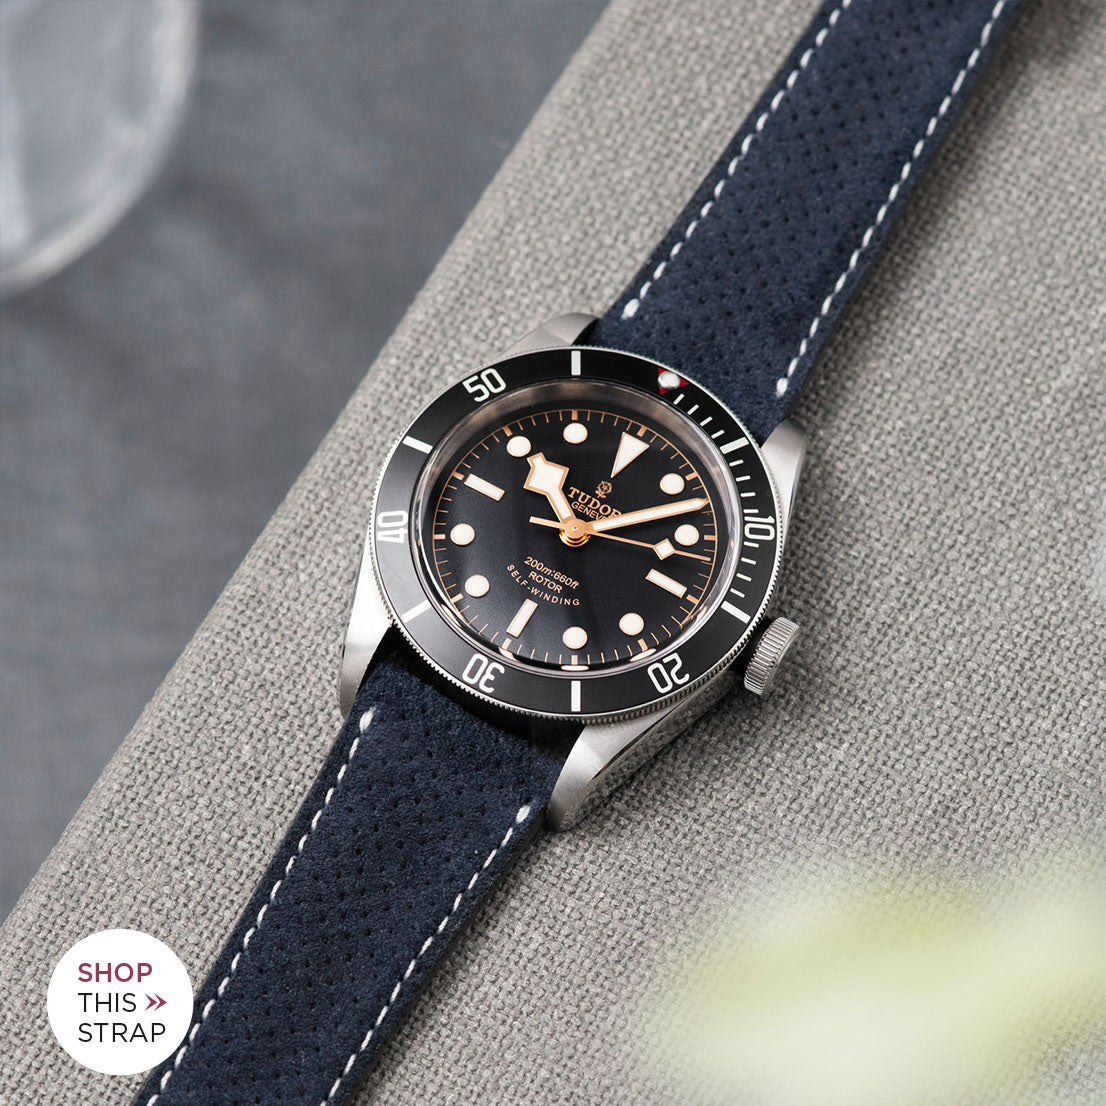 Bulang and Sons_Strap Guide_The Tudor Black Bay Black 79220N_Punched Blue Silky Suede Leather Watch Strap